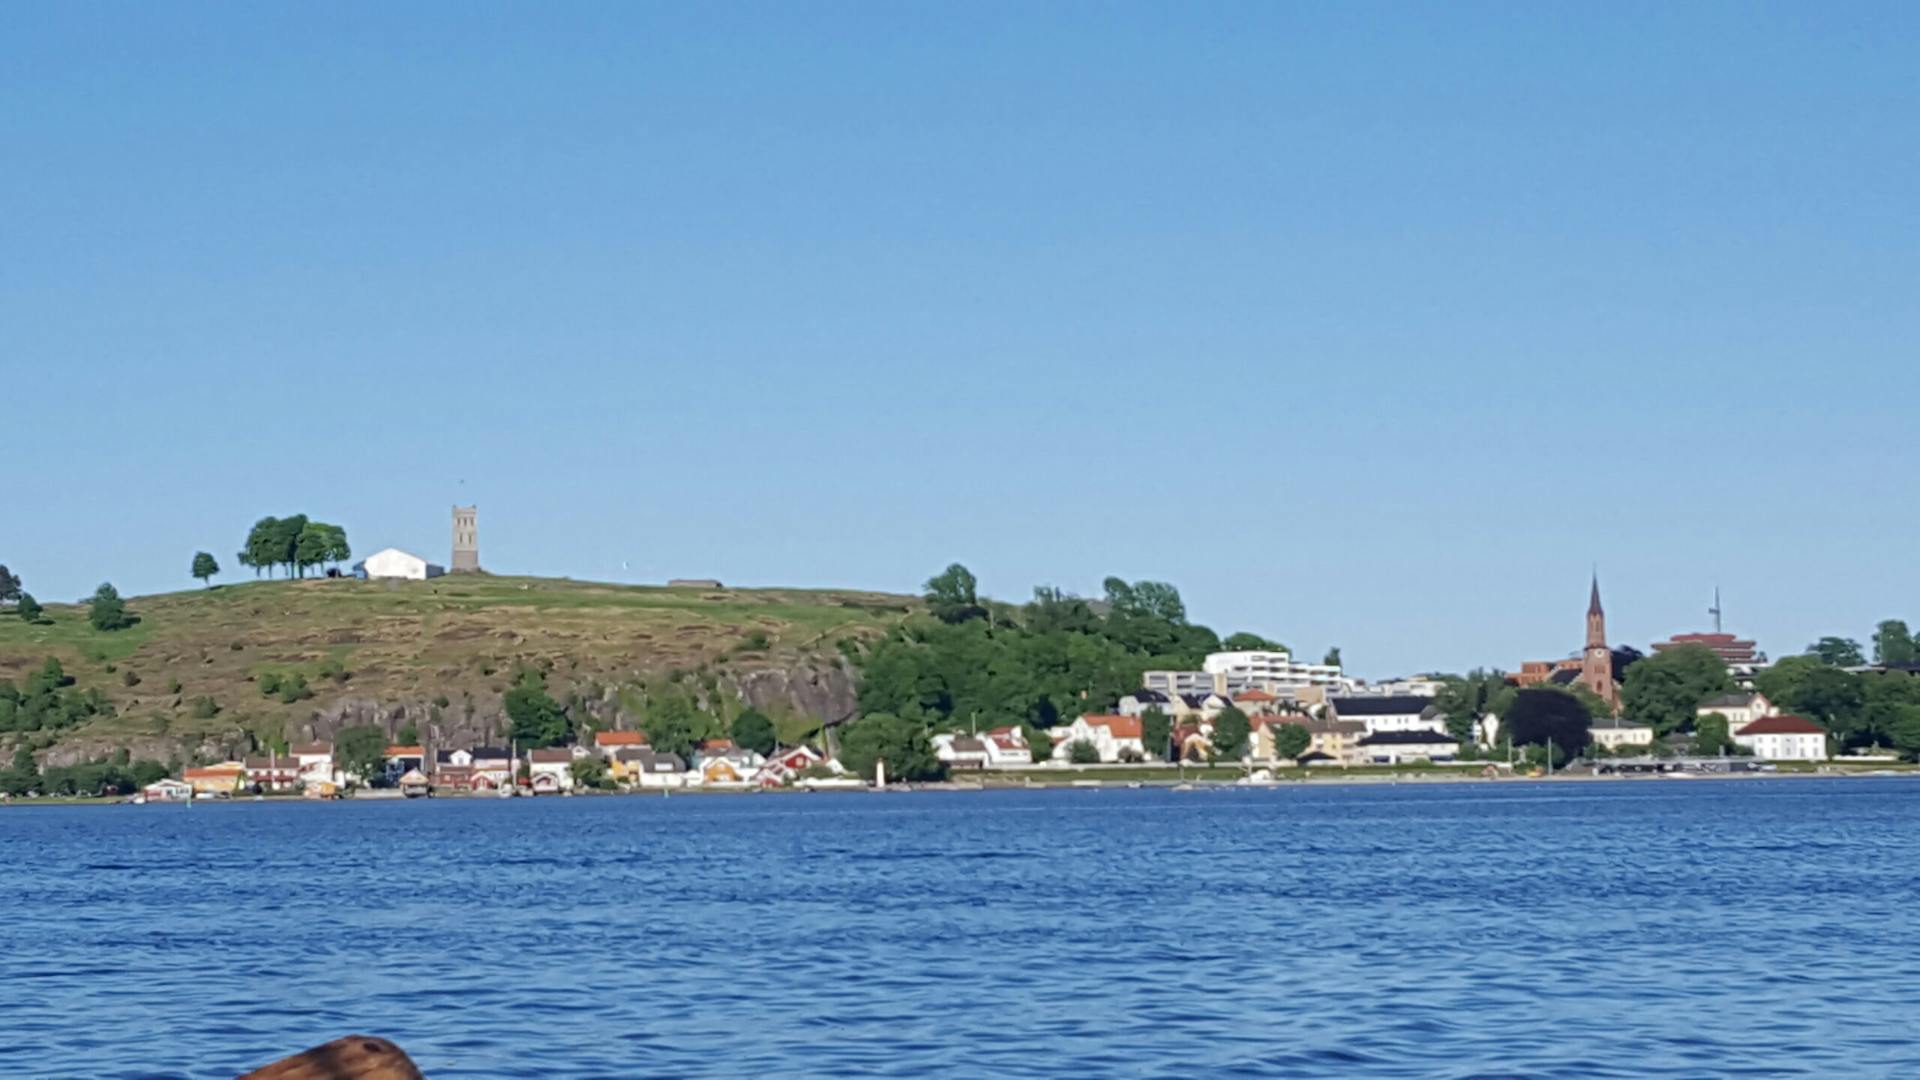 Tønsberg, the old tower from the castle on top of the mountain can be spotted from far away